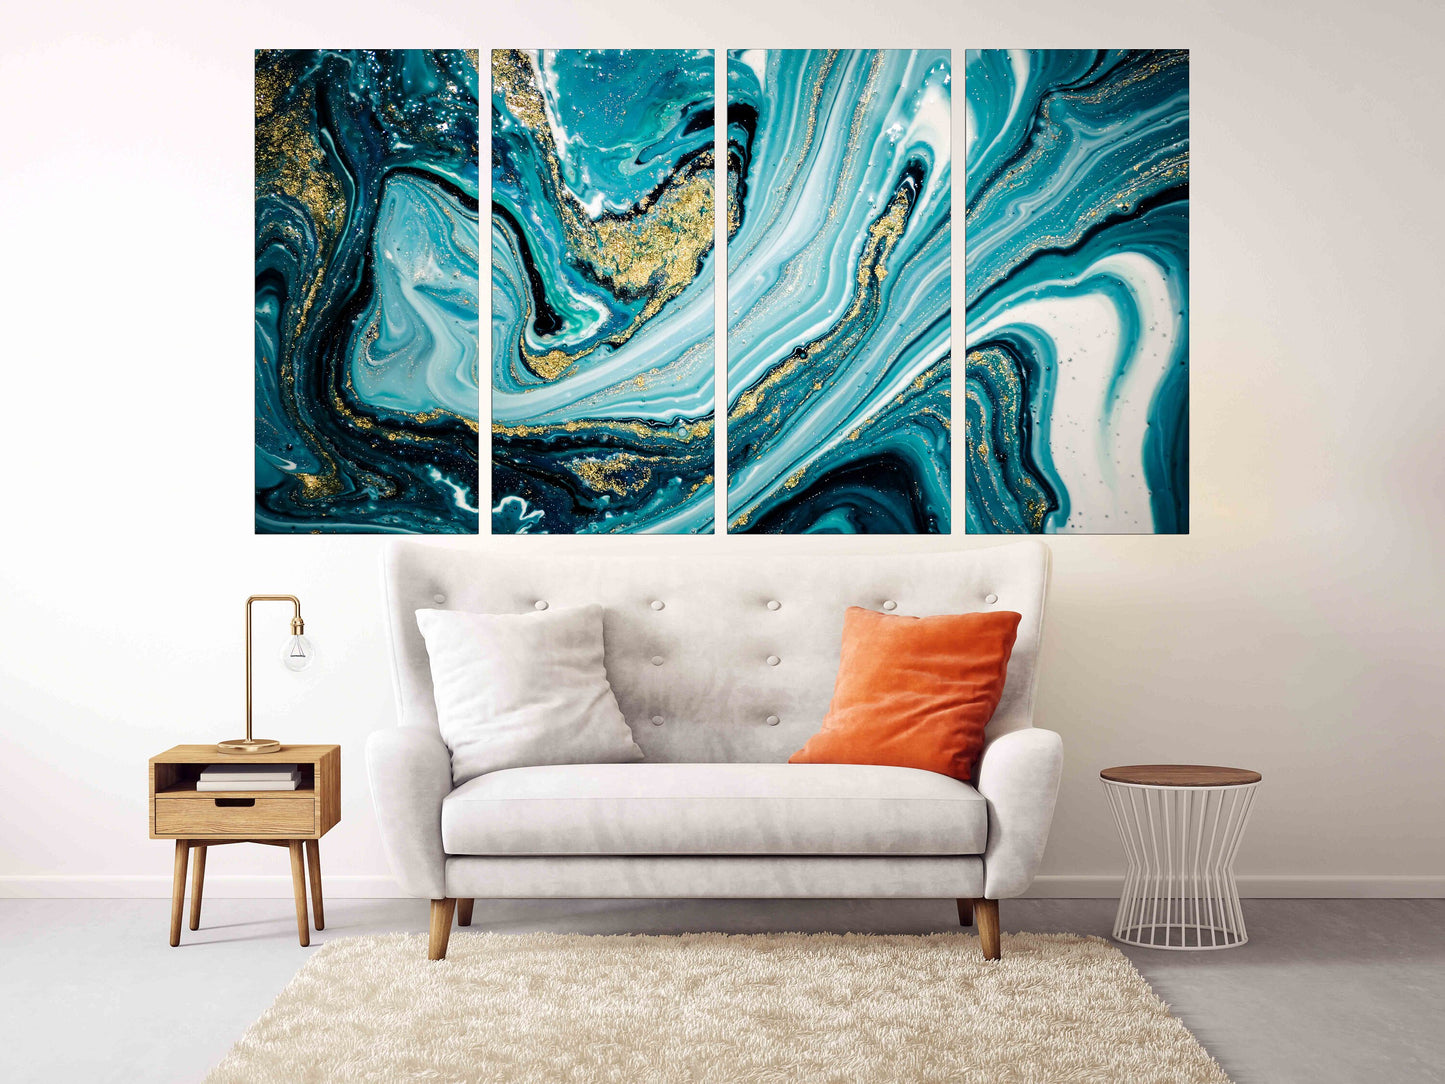 Marble wall decor, marble canvas abstract, Abstract wall art paintings on canvas, multi panel wall art Marble canvas Pour painting